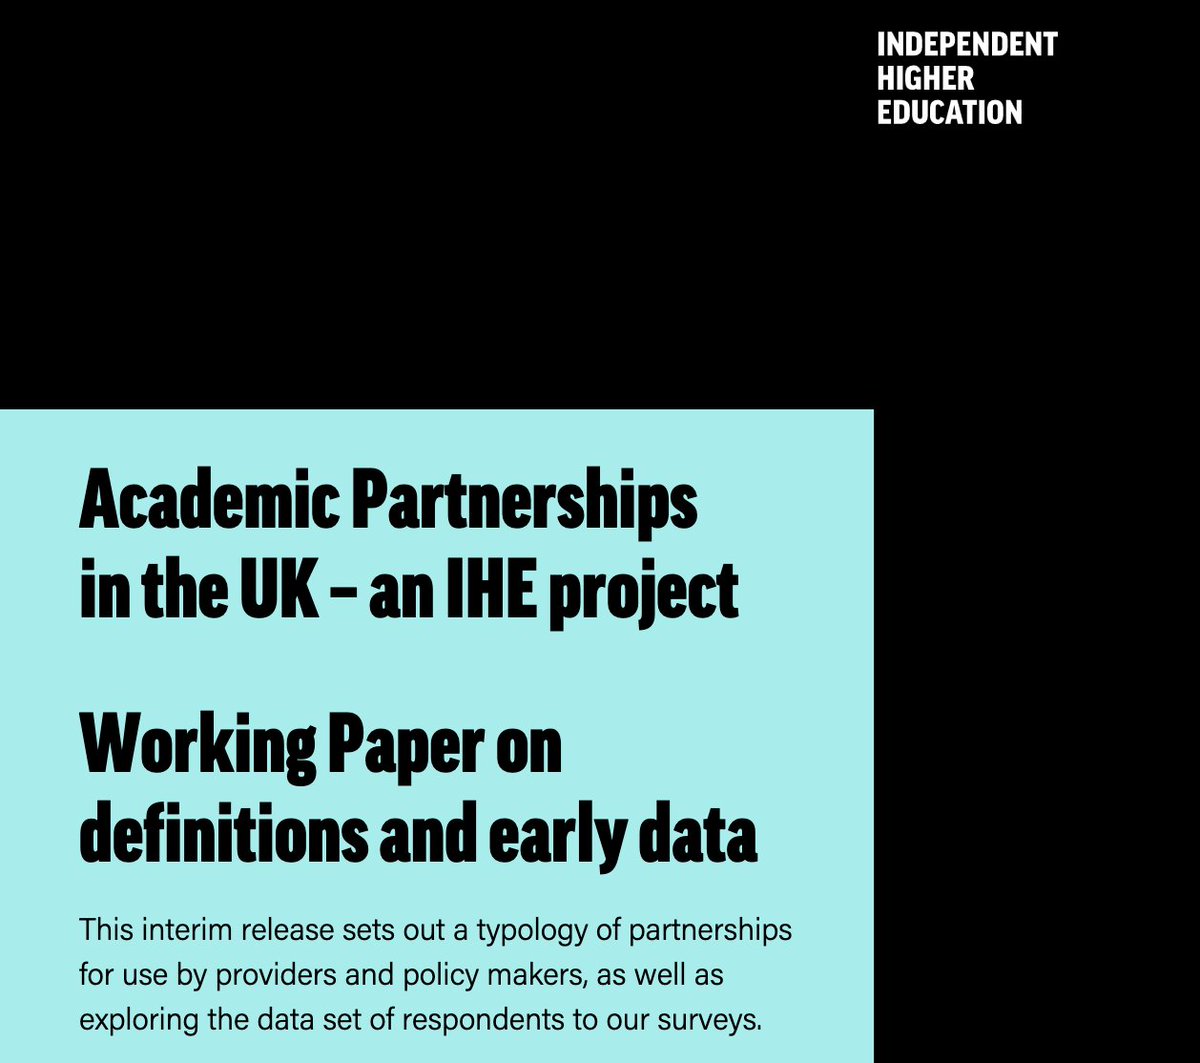 As part of our project exploring academic partnerships in the UK, @Independent_HE have today published a working paper sharing early data + insights from our research and proposing clear definitions for the most common types of partnership. Read it here: ihe.ac.uk/latest/publica…